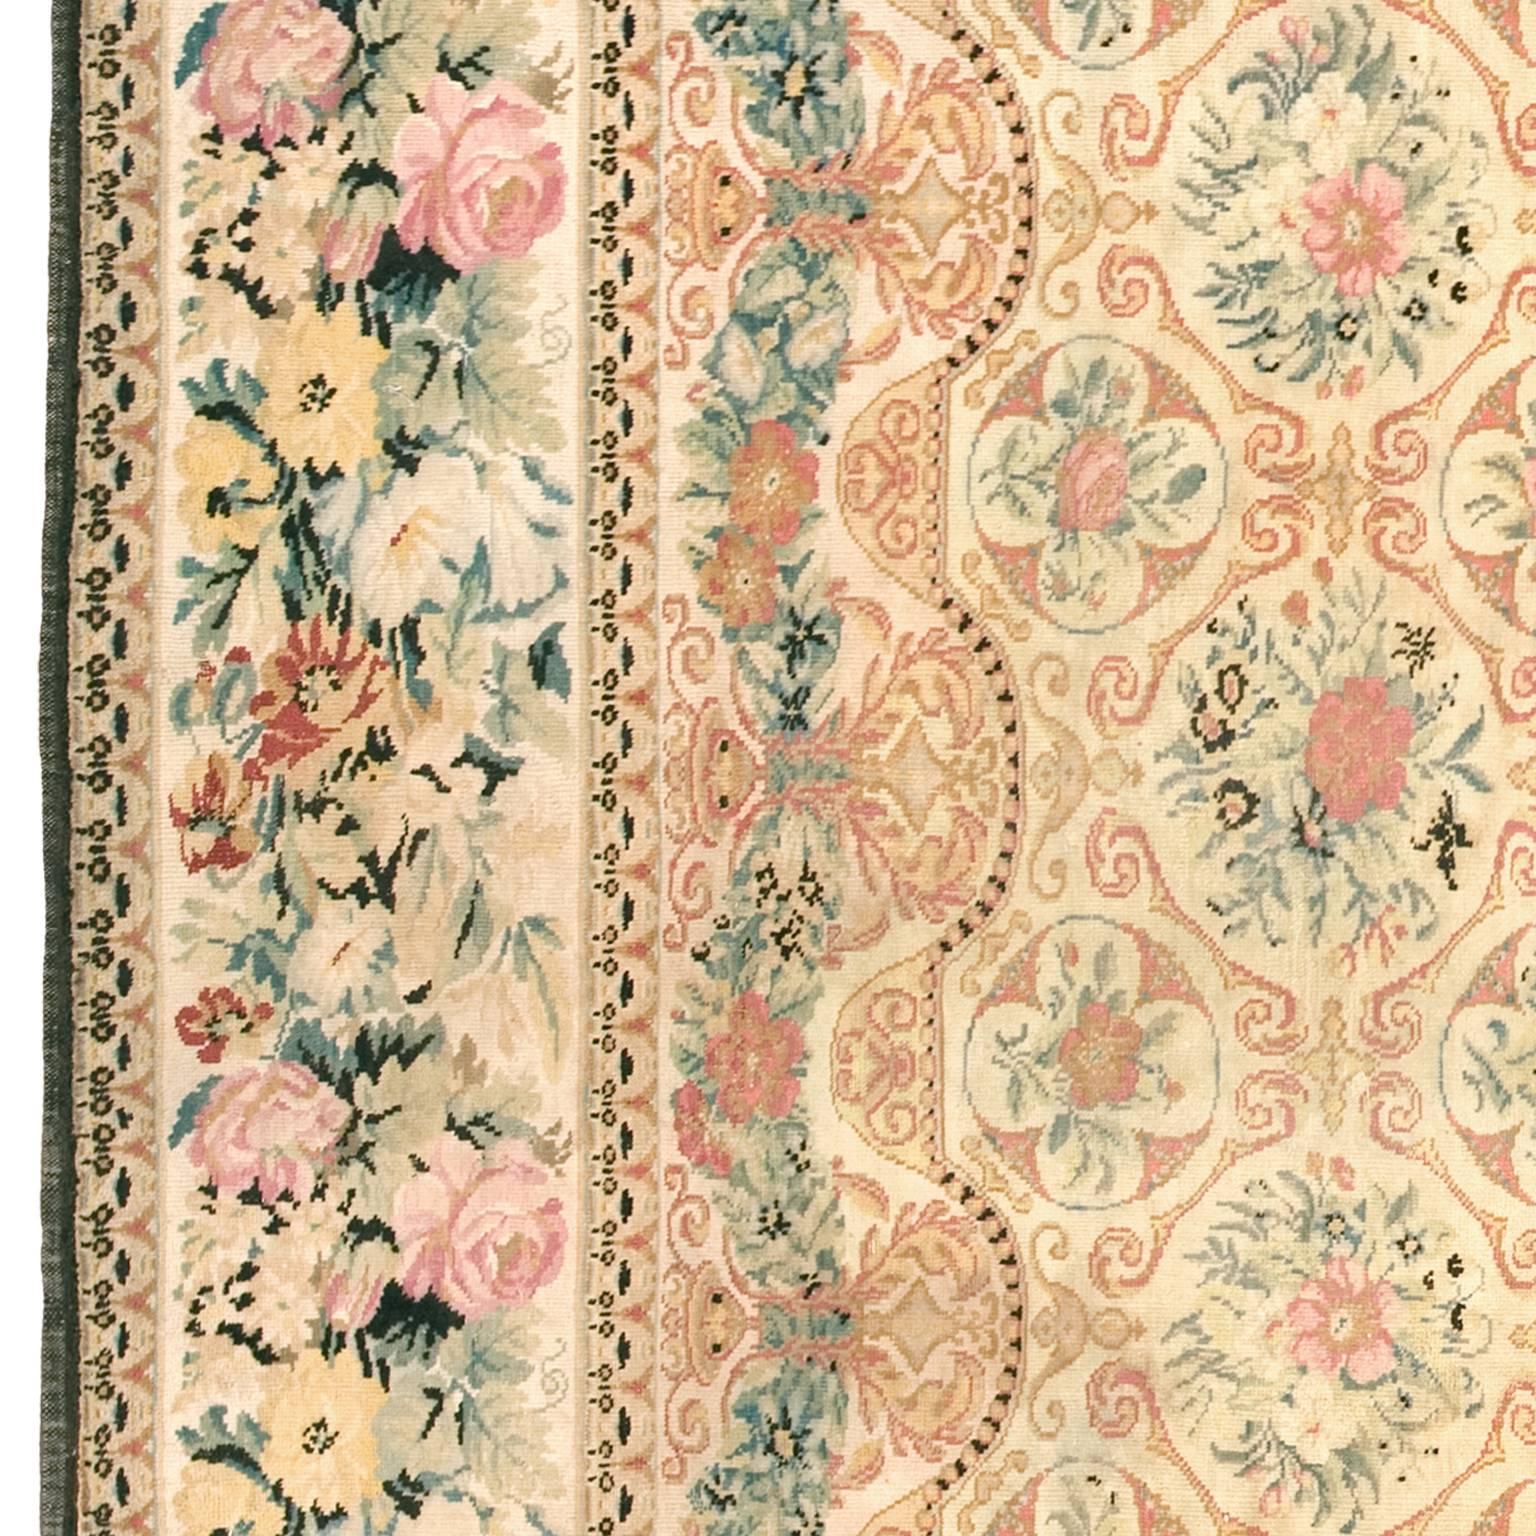 Ukranian Pile Carpet with Floral Design, 19th Century In Good Condition For Sale In New York, NY